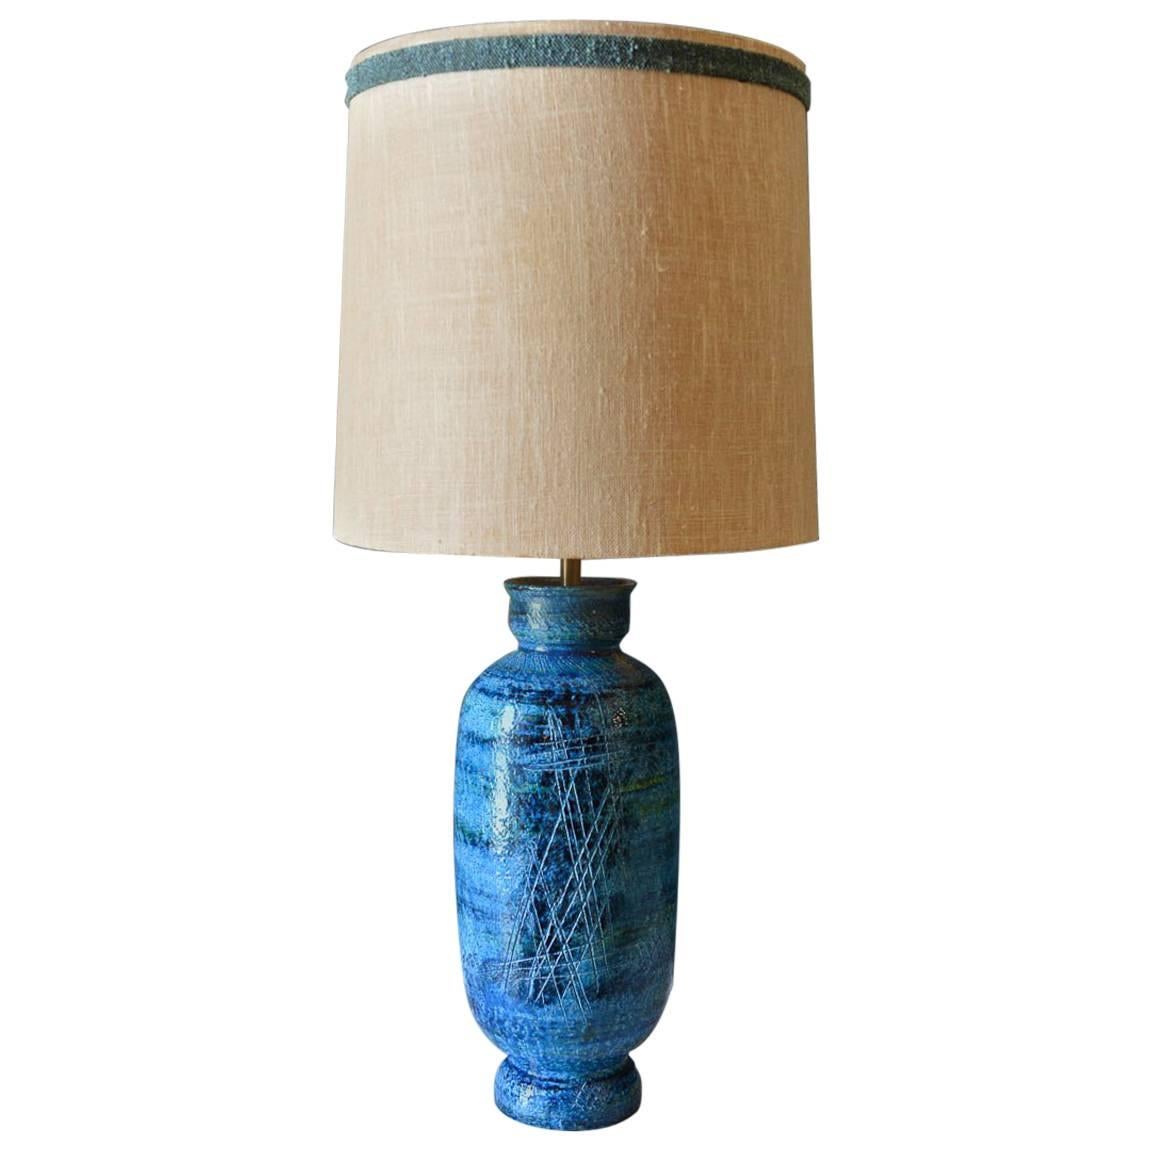 Table Lamp by Aldo Londi for Bitossi, Italy, circa 1965